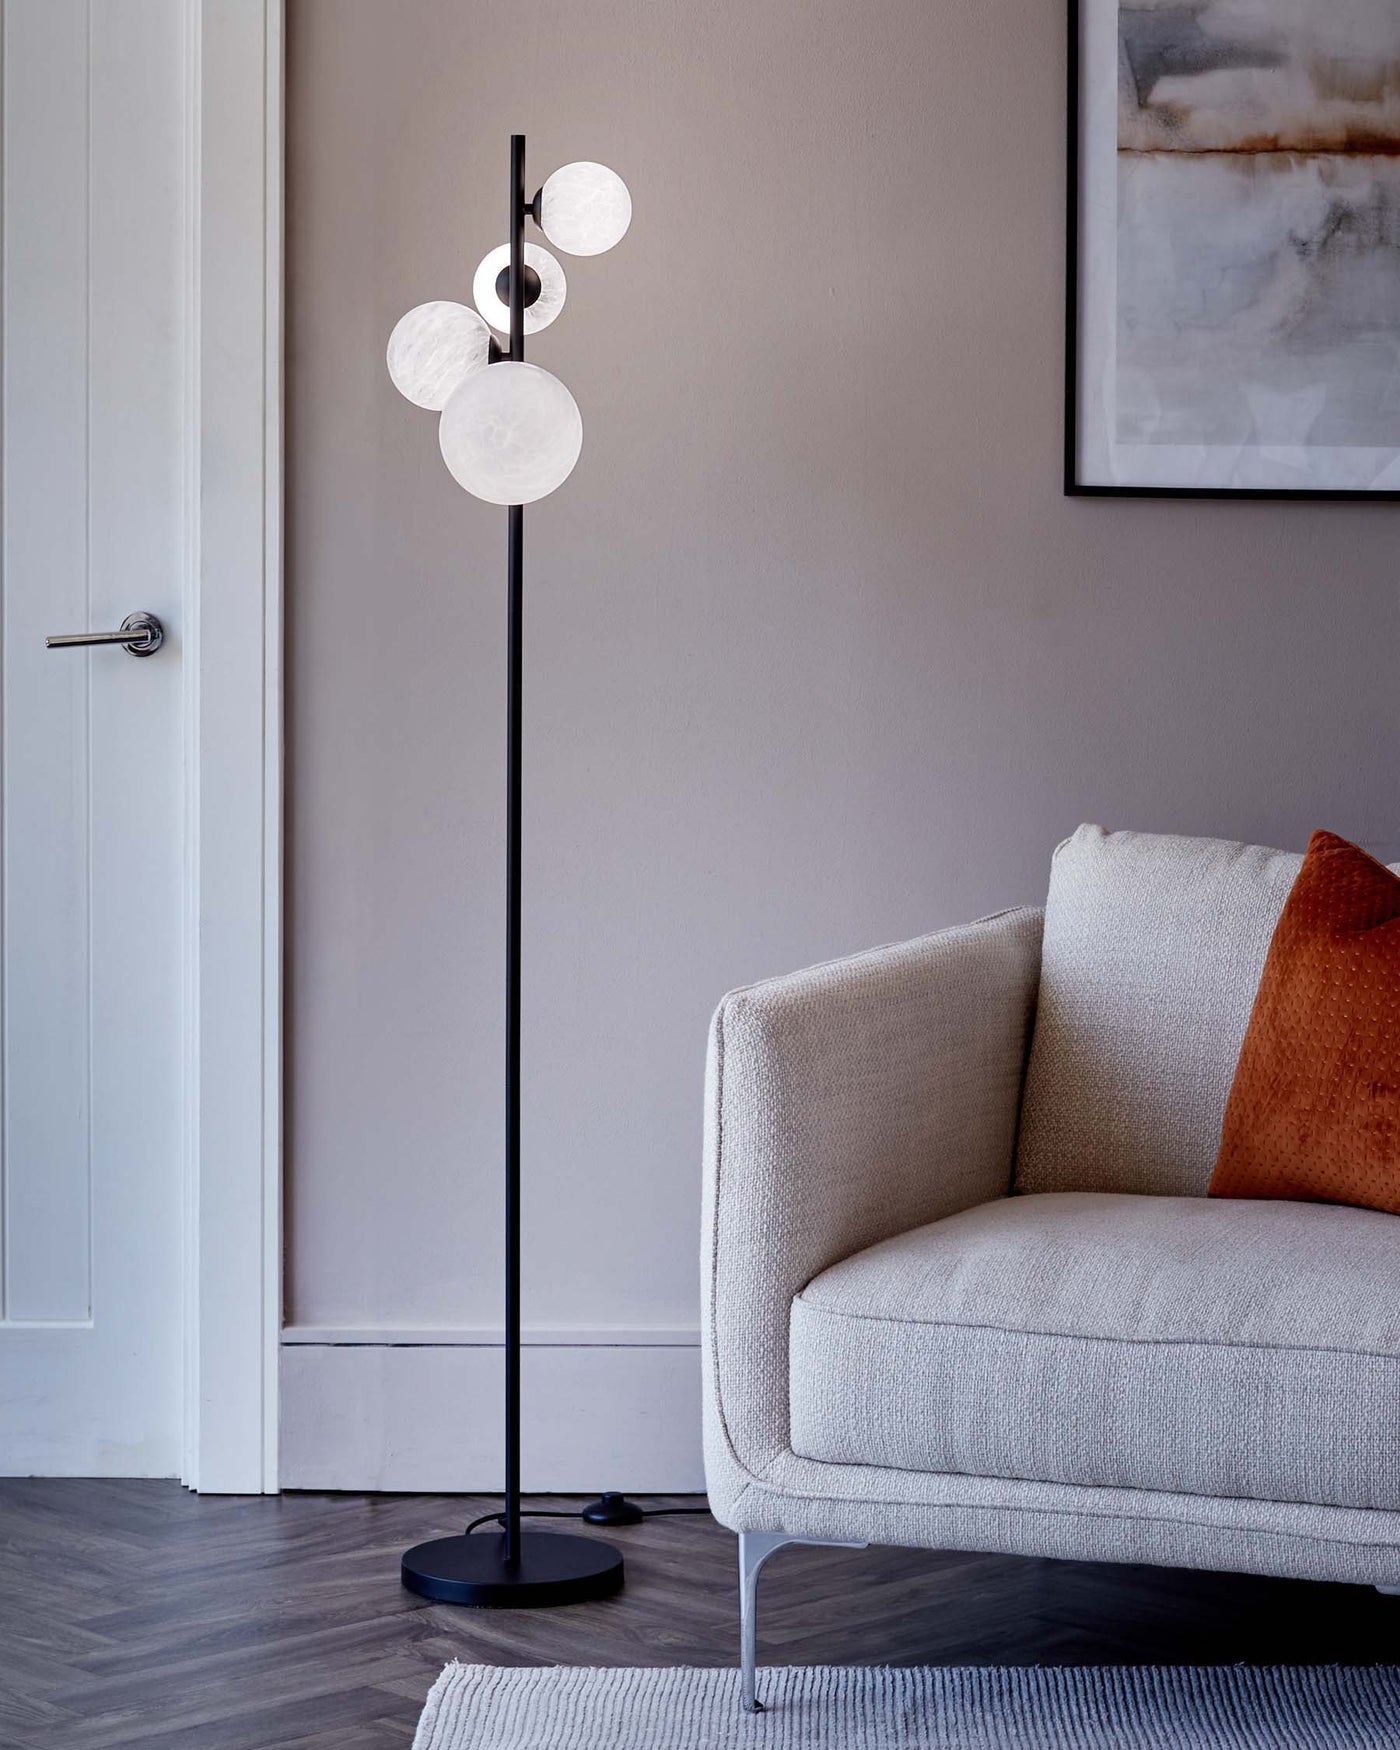 Modern minimalist style furniture in a living room setting, featuring a light grey fabric sofa with a sleek design and slim metal legs. Next to it stands a contemporary black floor lamp with a unique design of multiple frosted glass globes at varying heights on a slender vertical rod. A small textured pillow adds a pop of orange colour to the sofa, and under both pieces rests a light grey woven area rug on dark hardwood flooring. The decor is complemented by a framed abstract wall painting in soft hues.